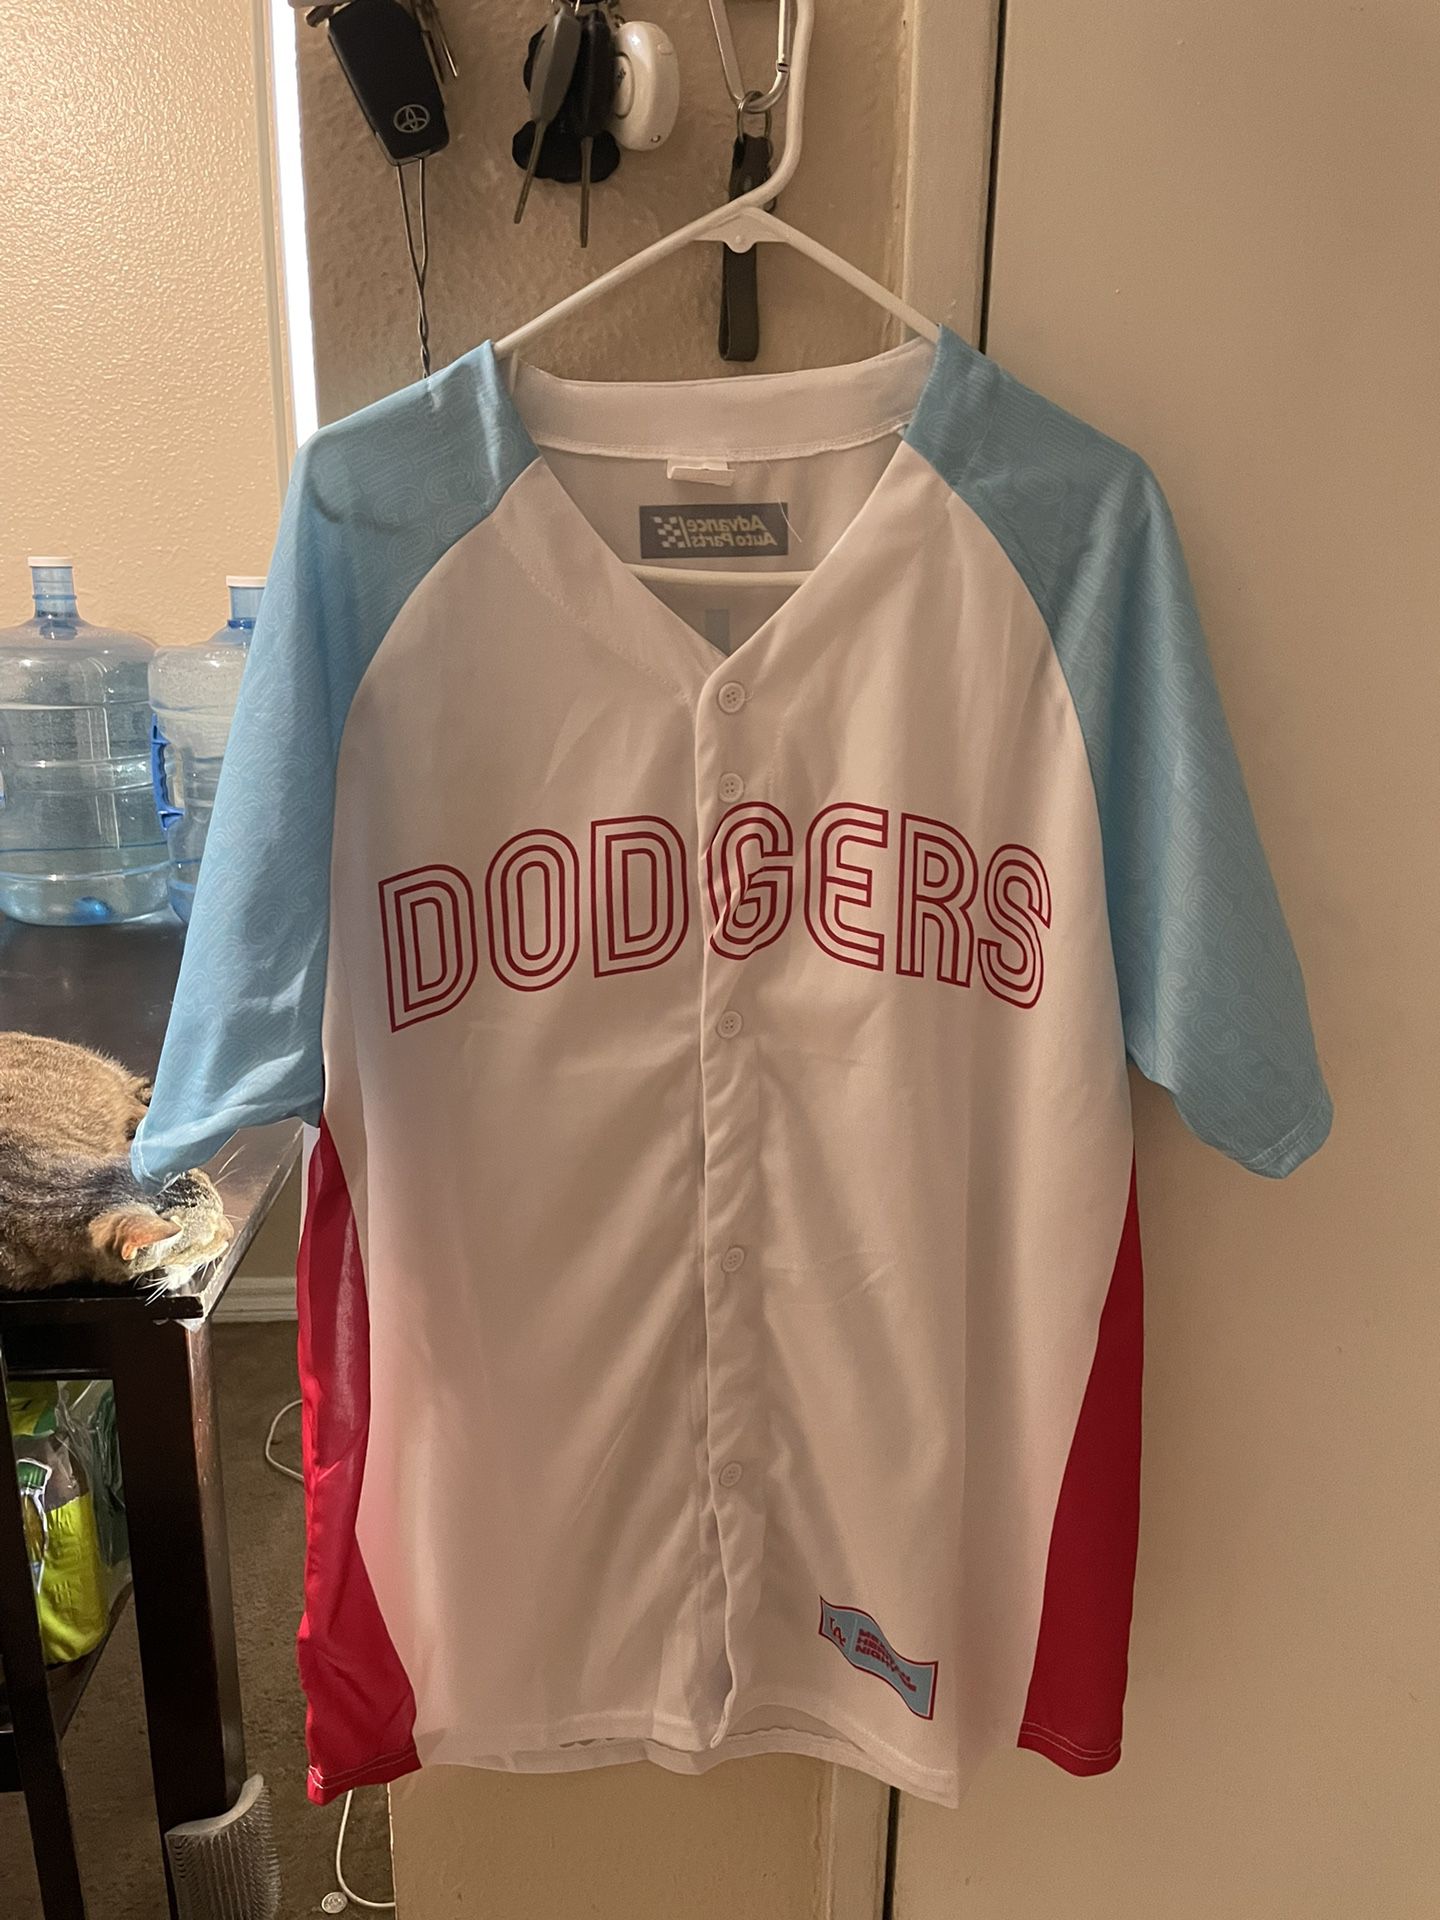 mexican heritage night jersey